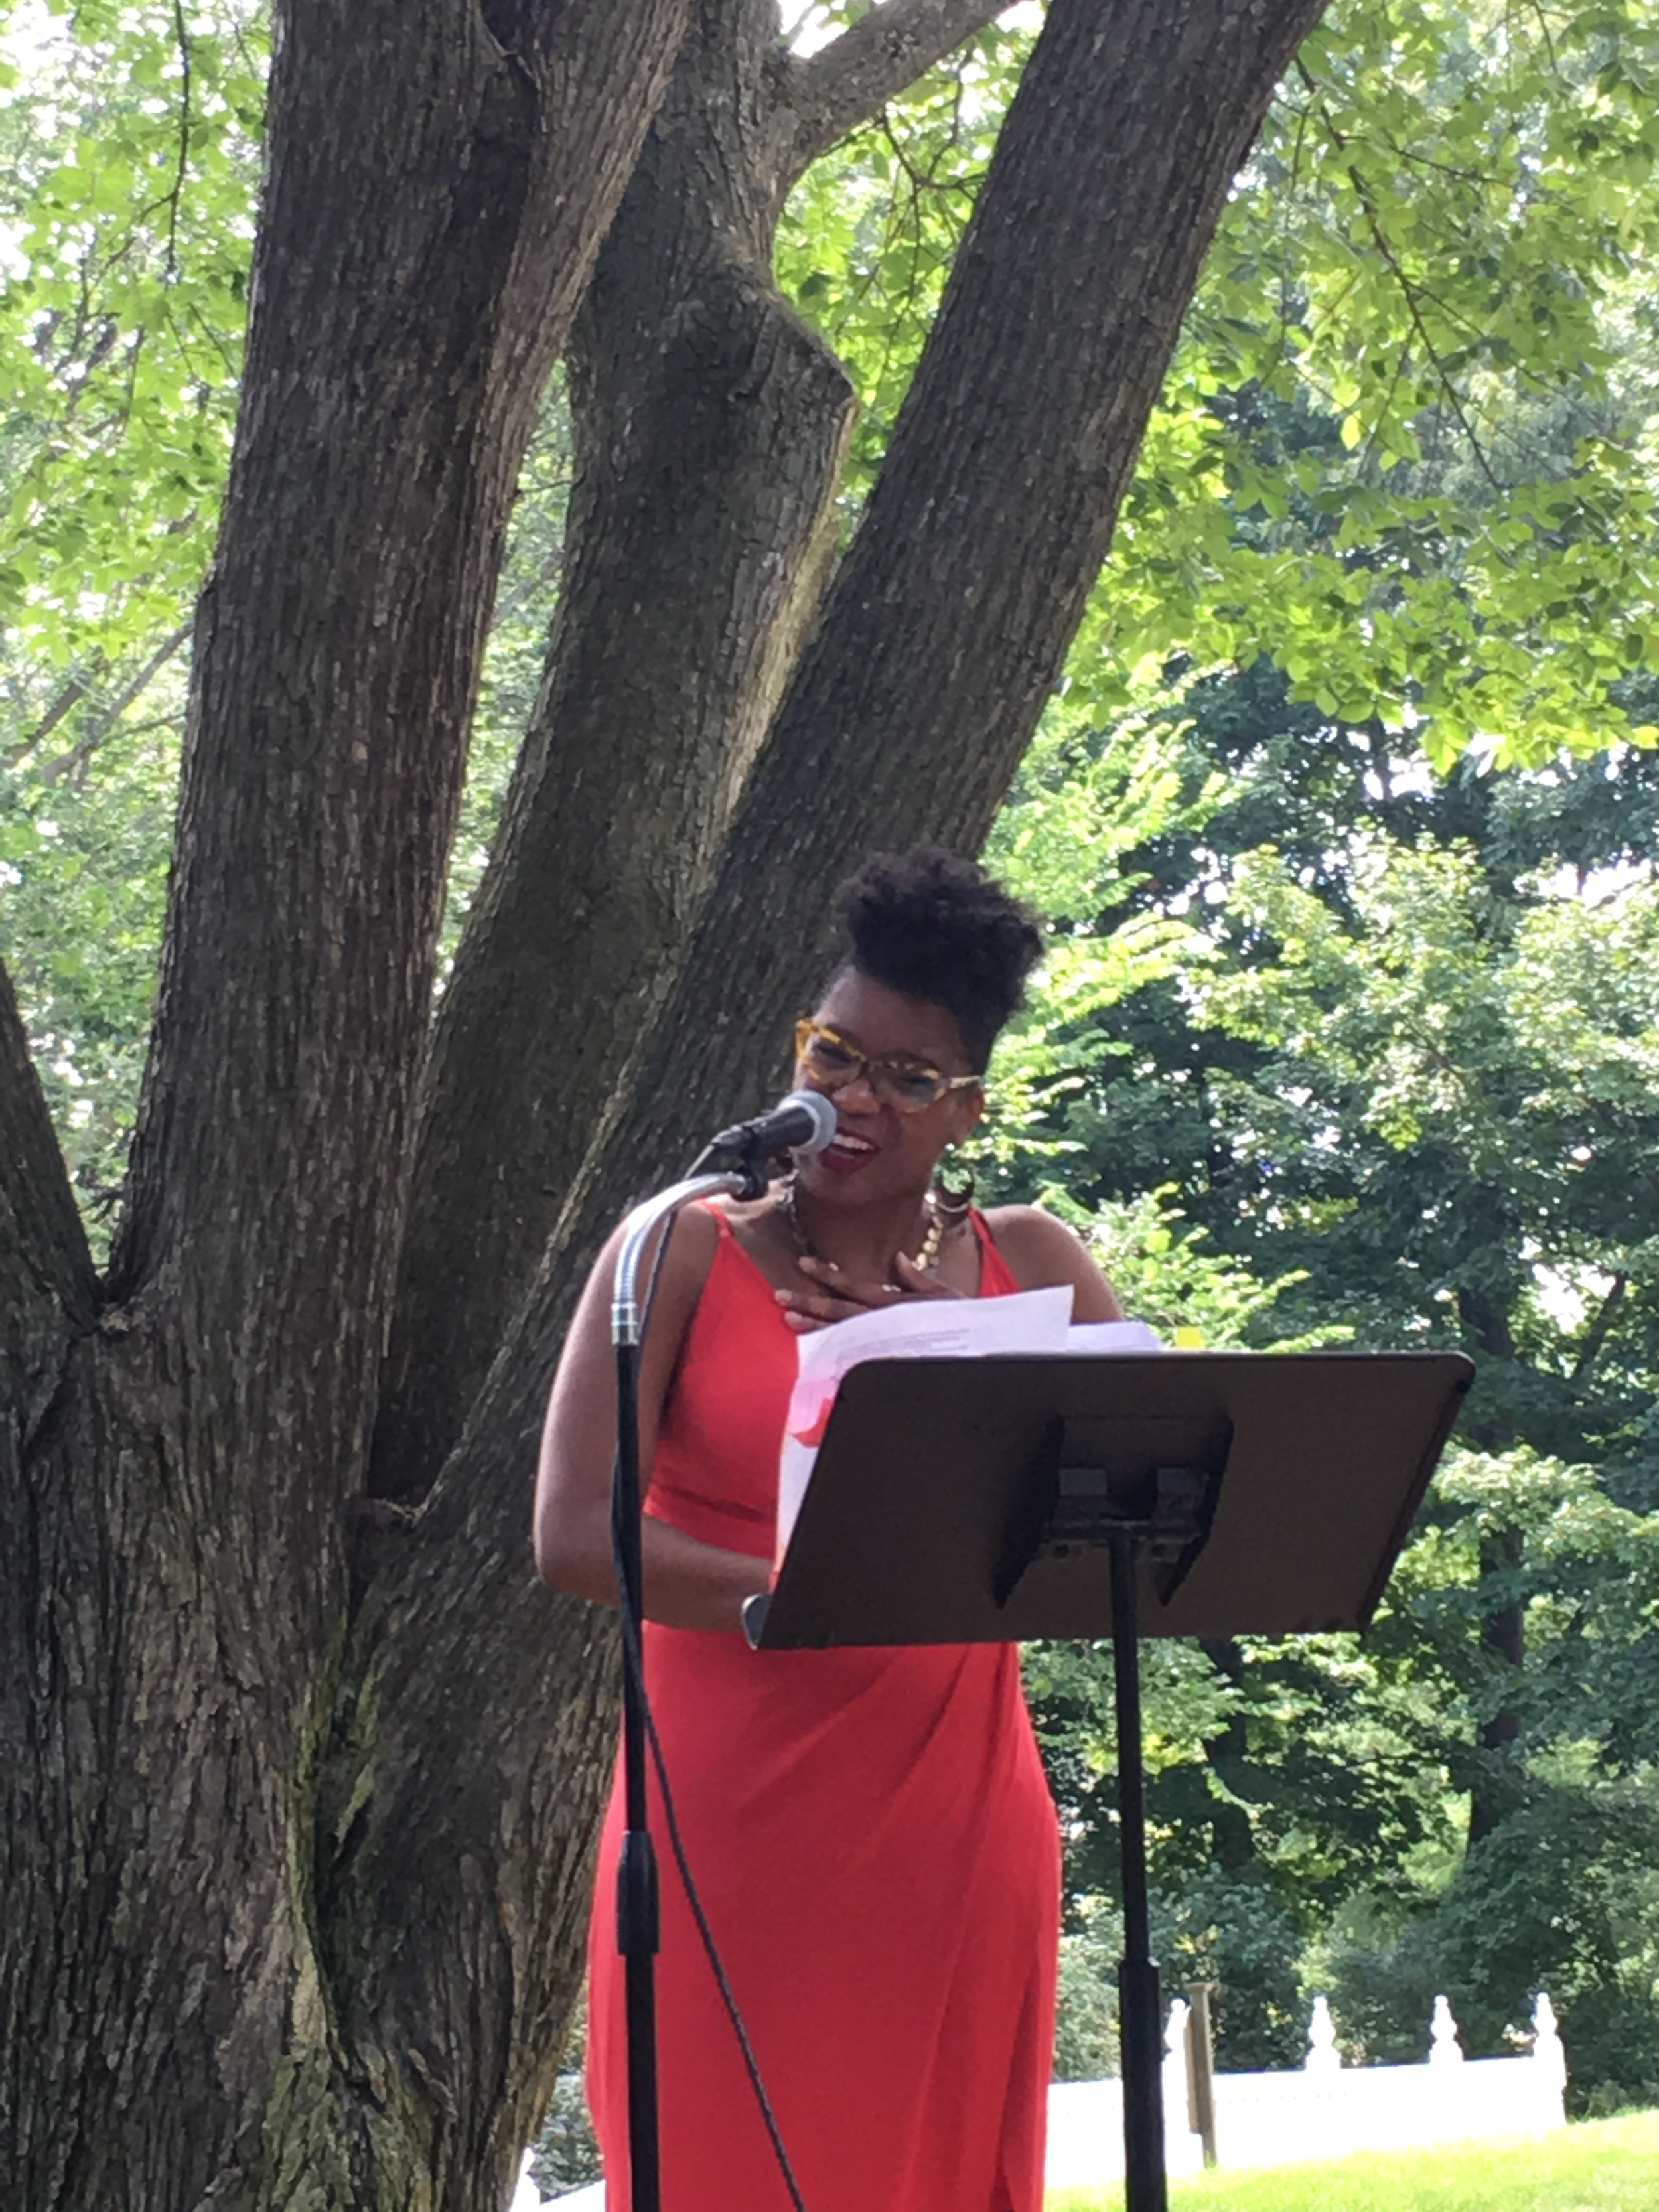 Poet Krysten Hill reading at the New England Poetry Club. She is standing outside, in front of a large tree and behind a music stand, which holds the paper she is reading from. Krysten is a Black woman with short hair, wearing tortoise, round rimmed glasses and chunky earrings, and a long red dress.